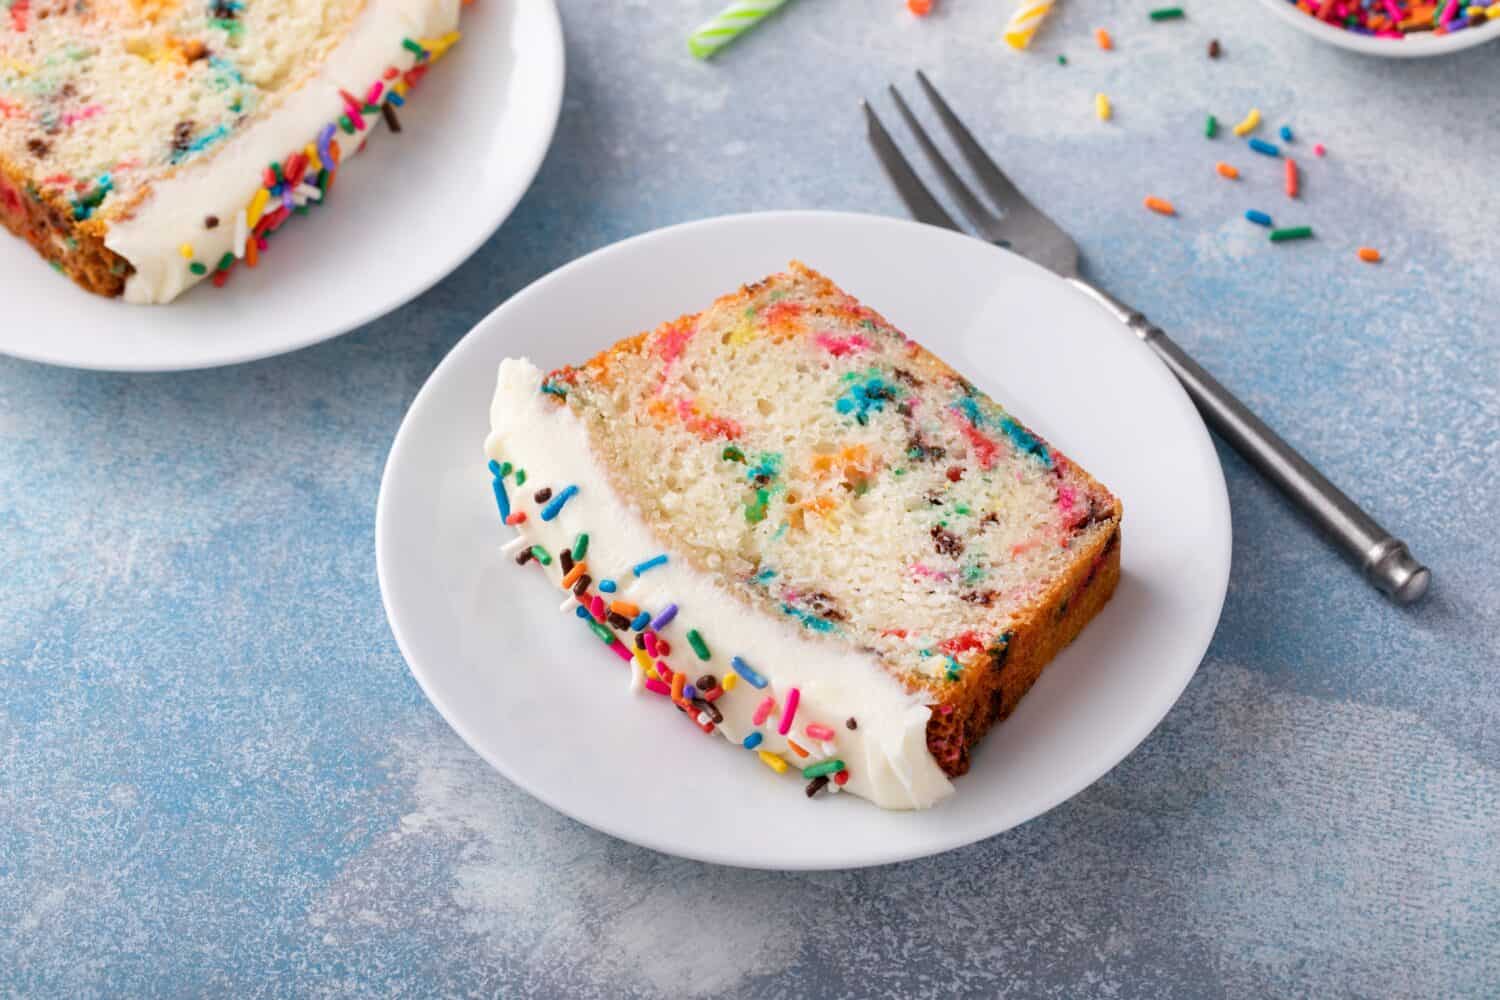 Birthday cake or funfetti pound cake with sprinkles and frosting sliced ready to eat